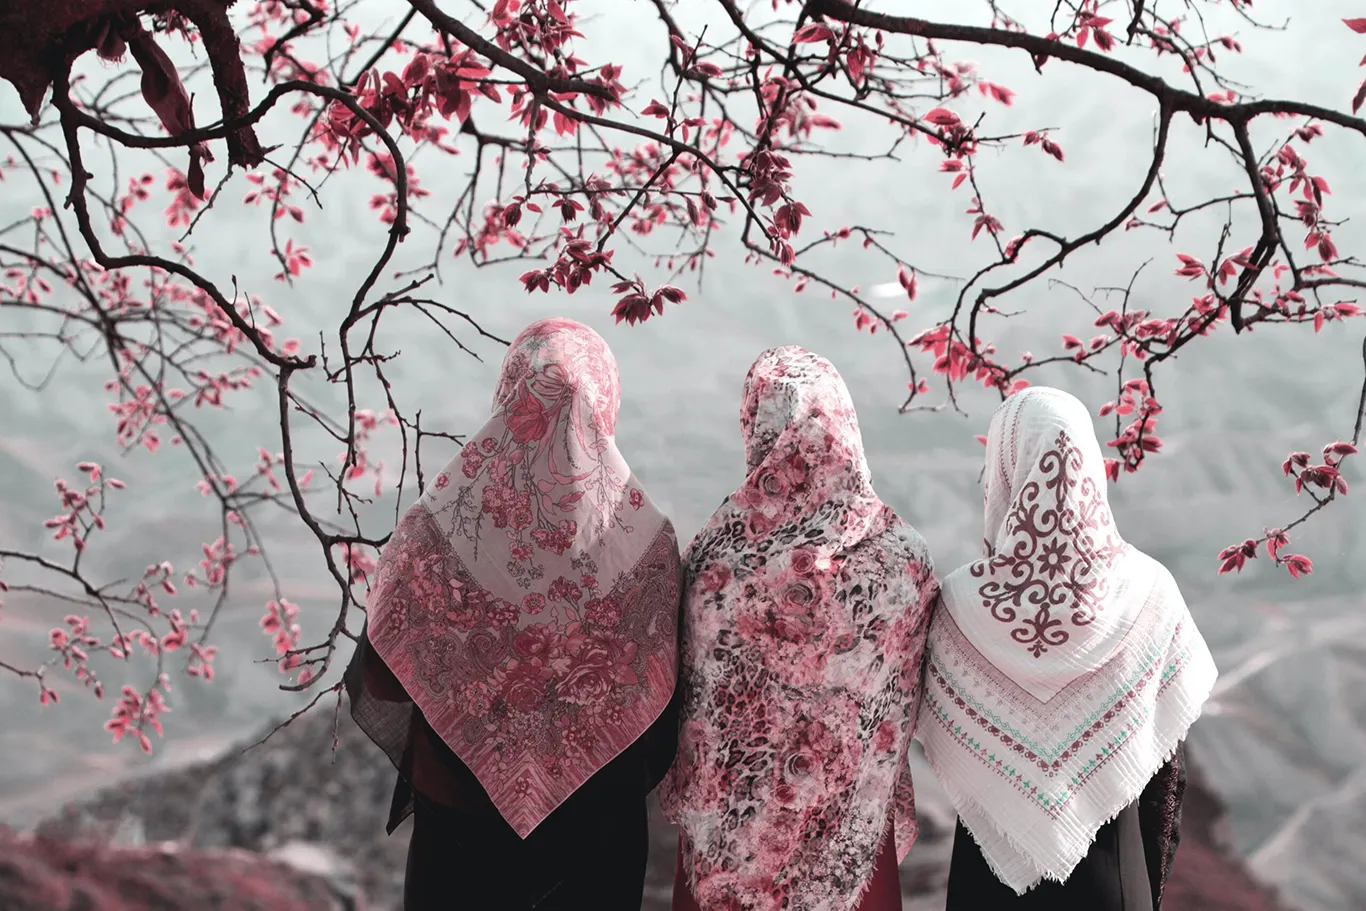 Back view of three women wearing headscarves and looking at view of mountains.